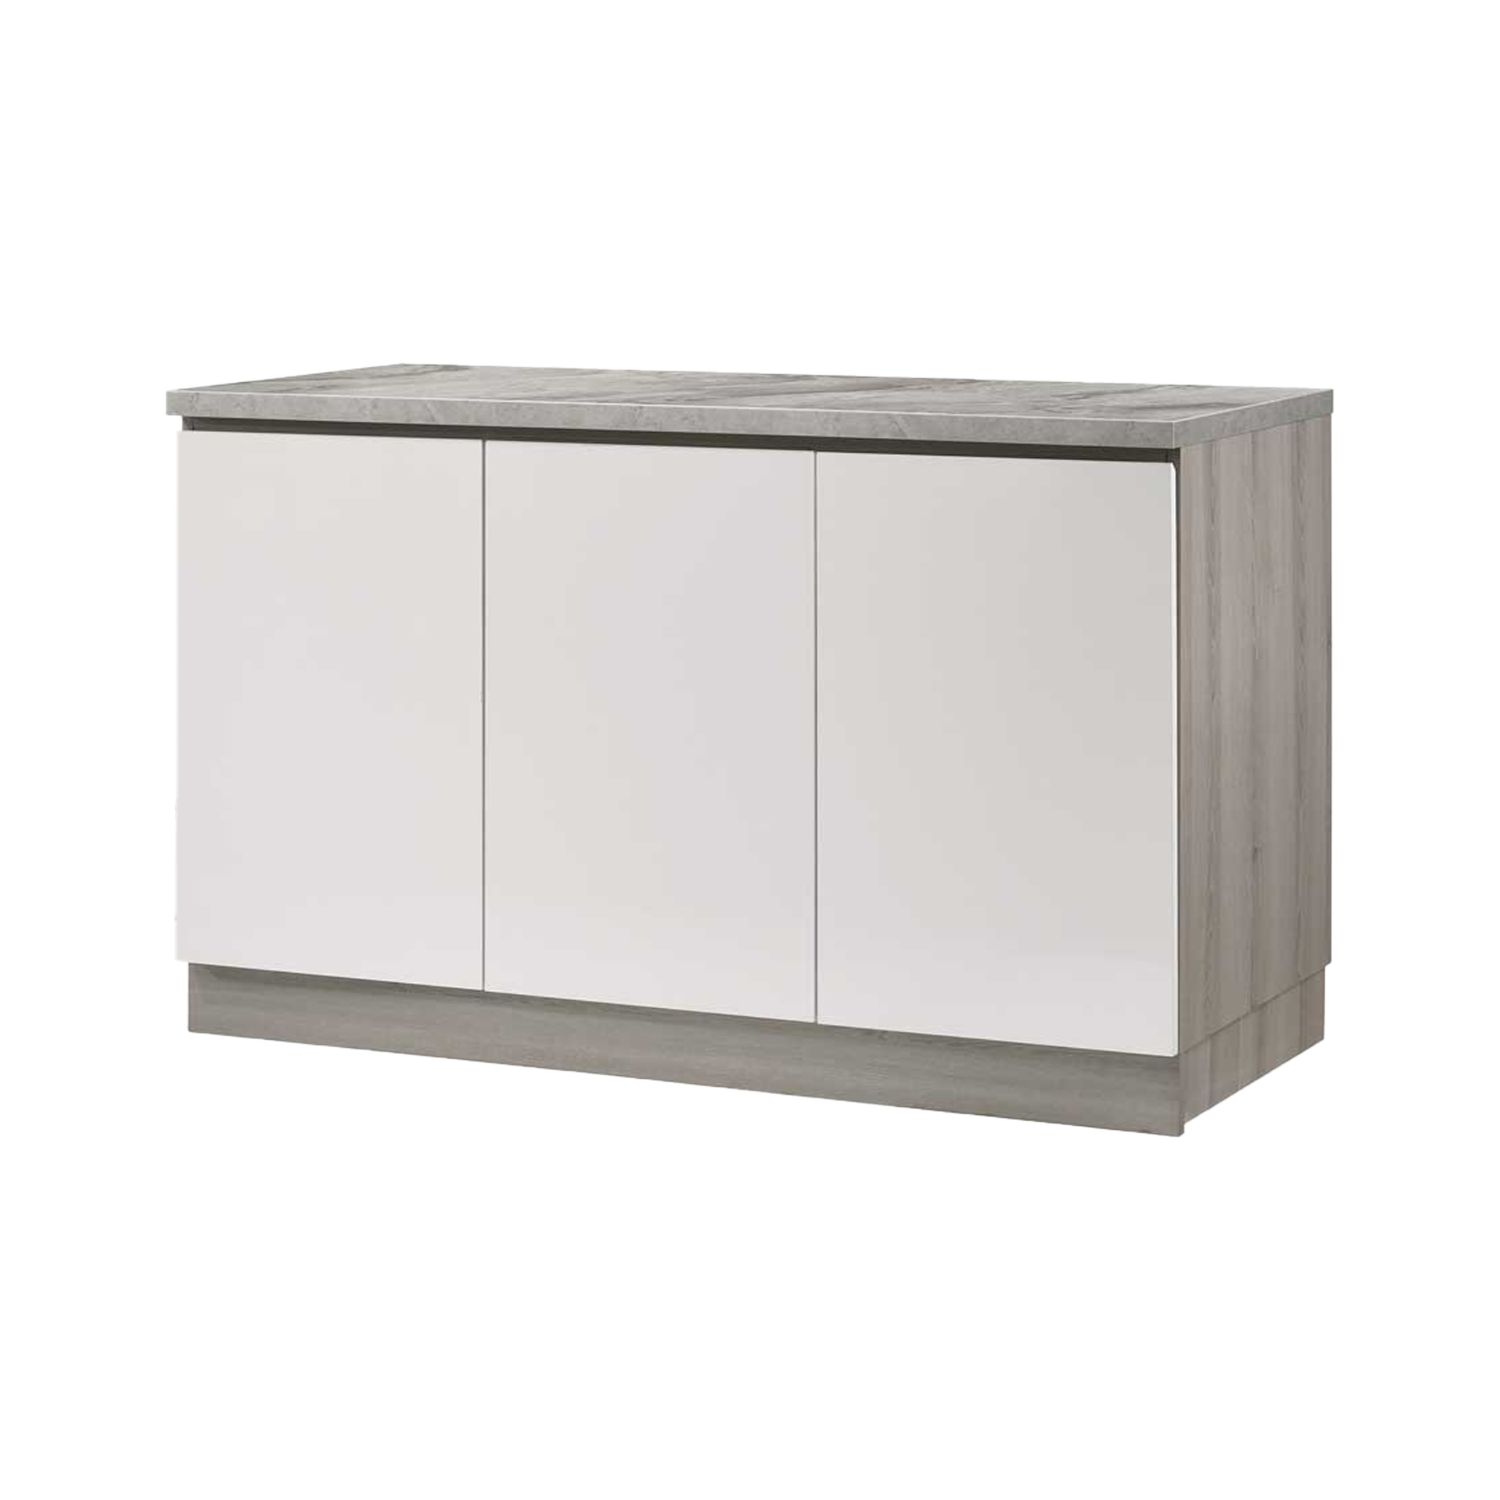 Picture of DAVINCI 4.5FT KITCHEN CABINET  (BASE UNIT) WITH HIGH GLOSS WHITE -  GREY OAK